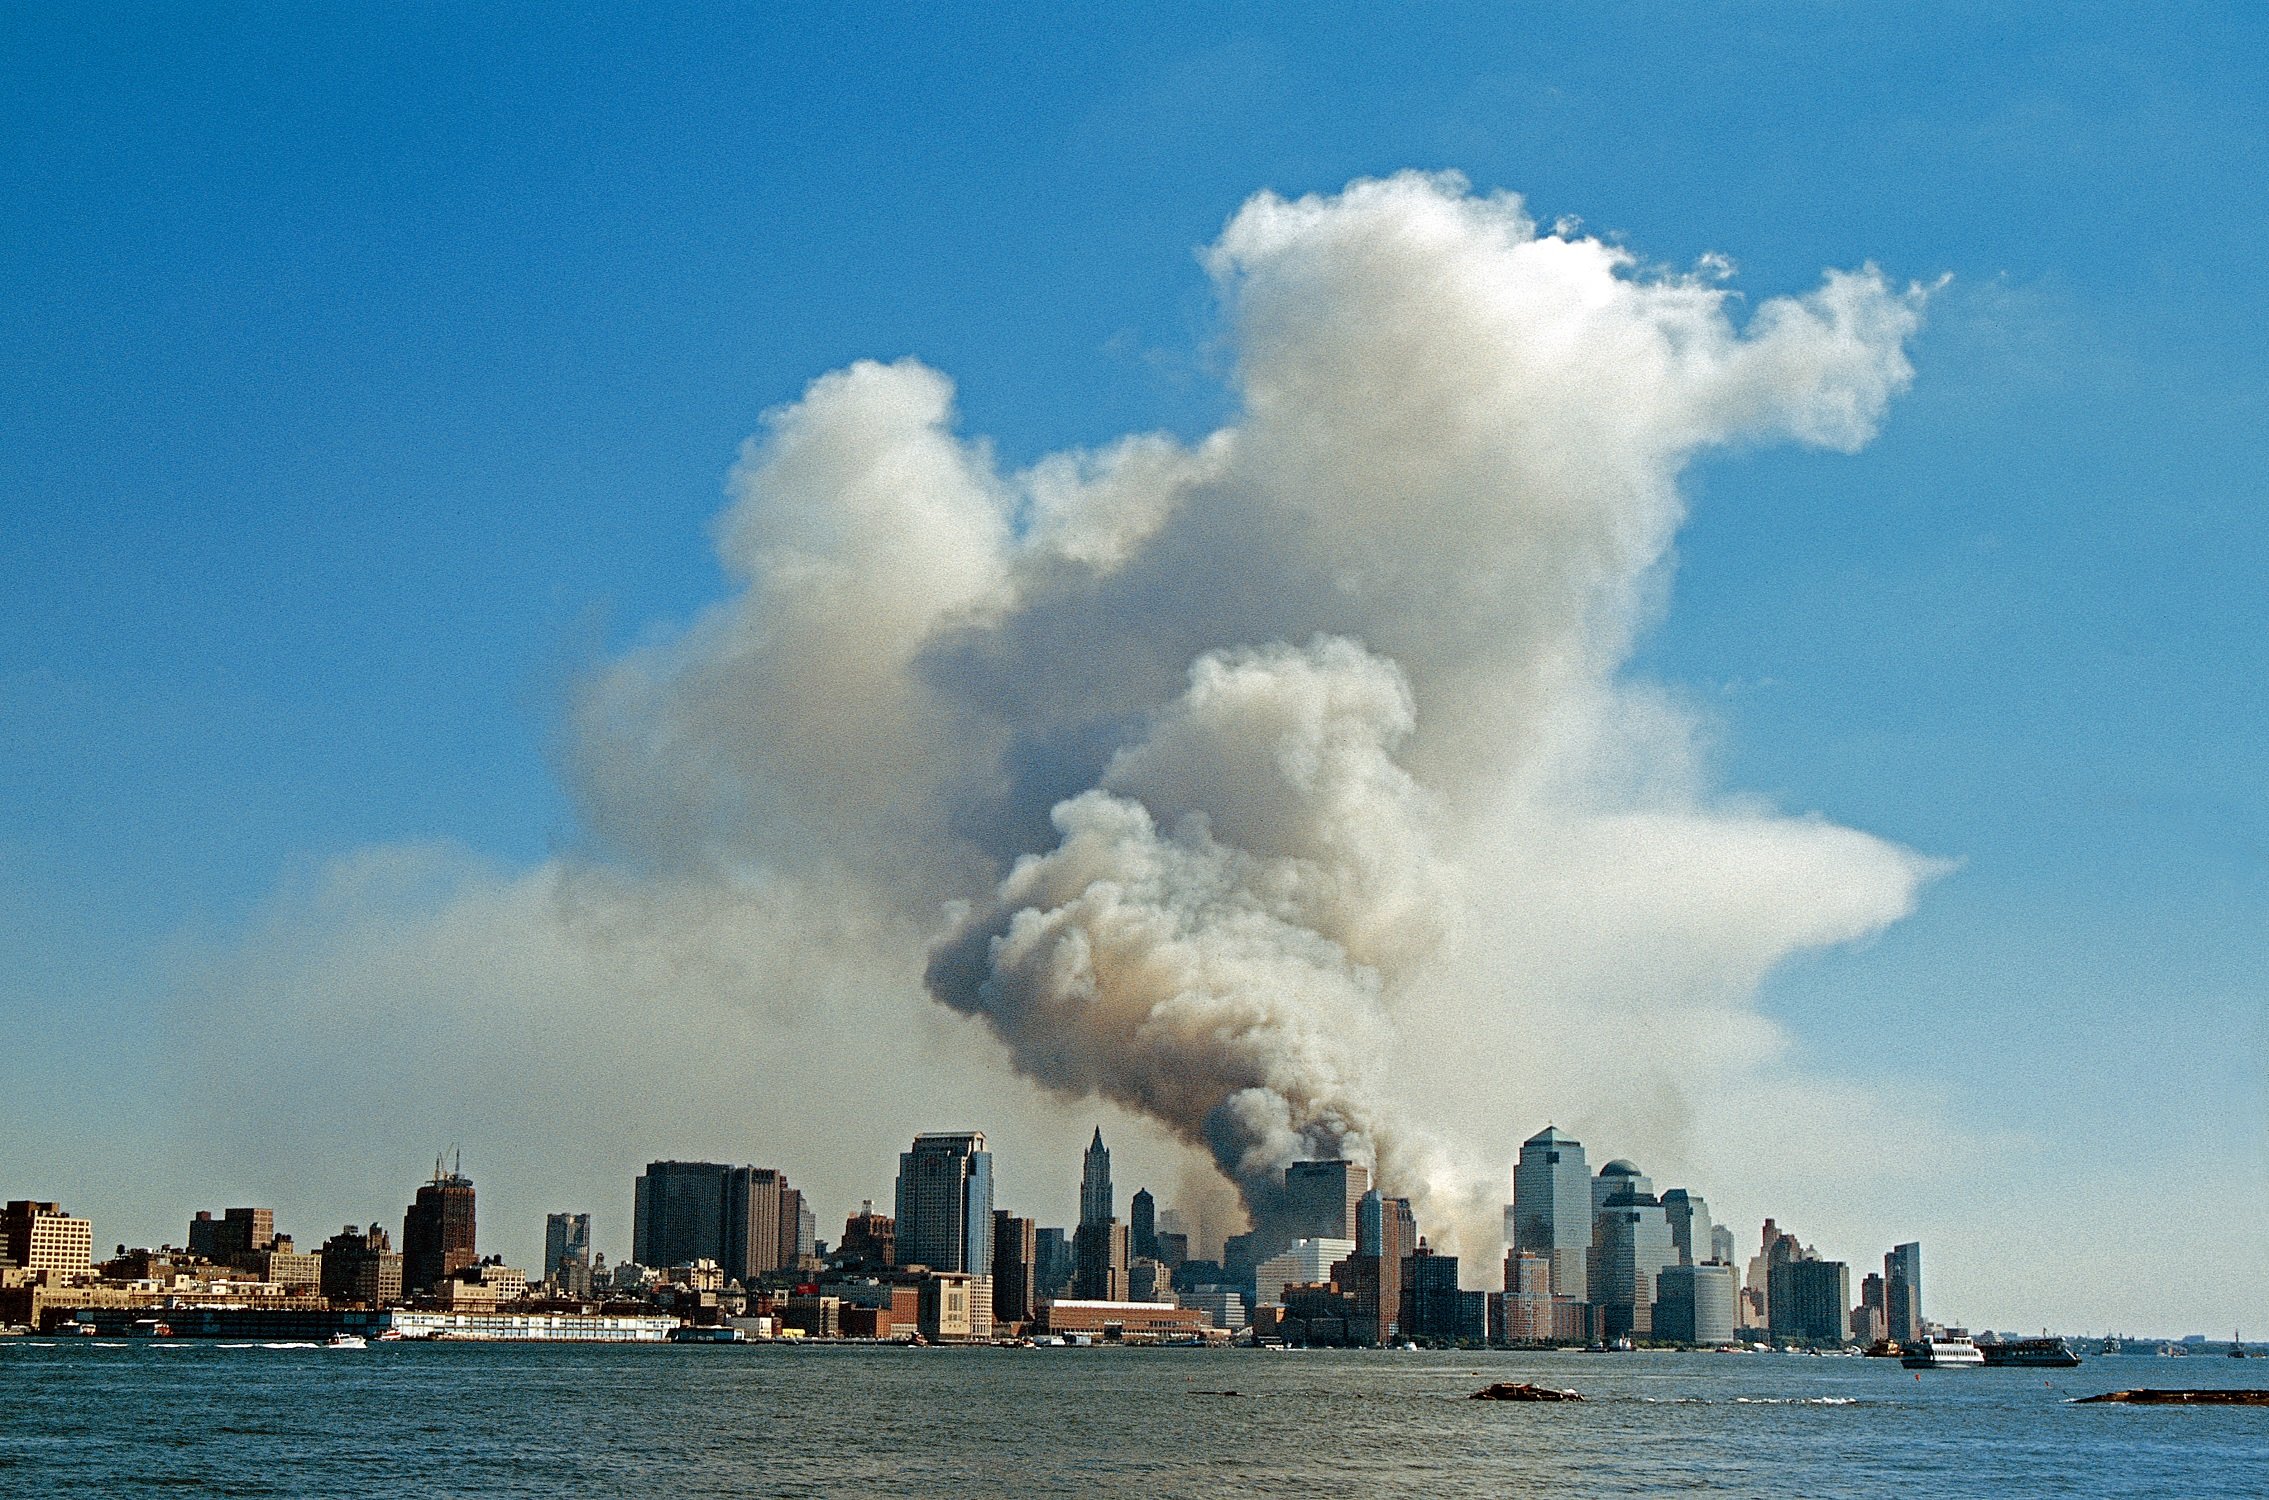 Smoke hangs over South Manhattan after the collapse of the World Trade Center in a terrorist attack, New York, New York, September 11, 2001.